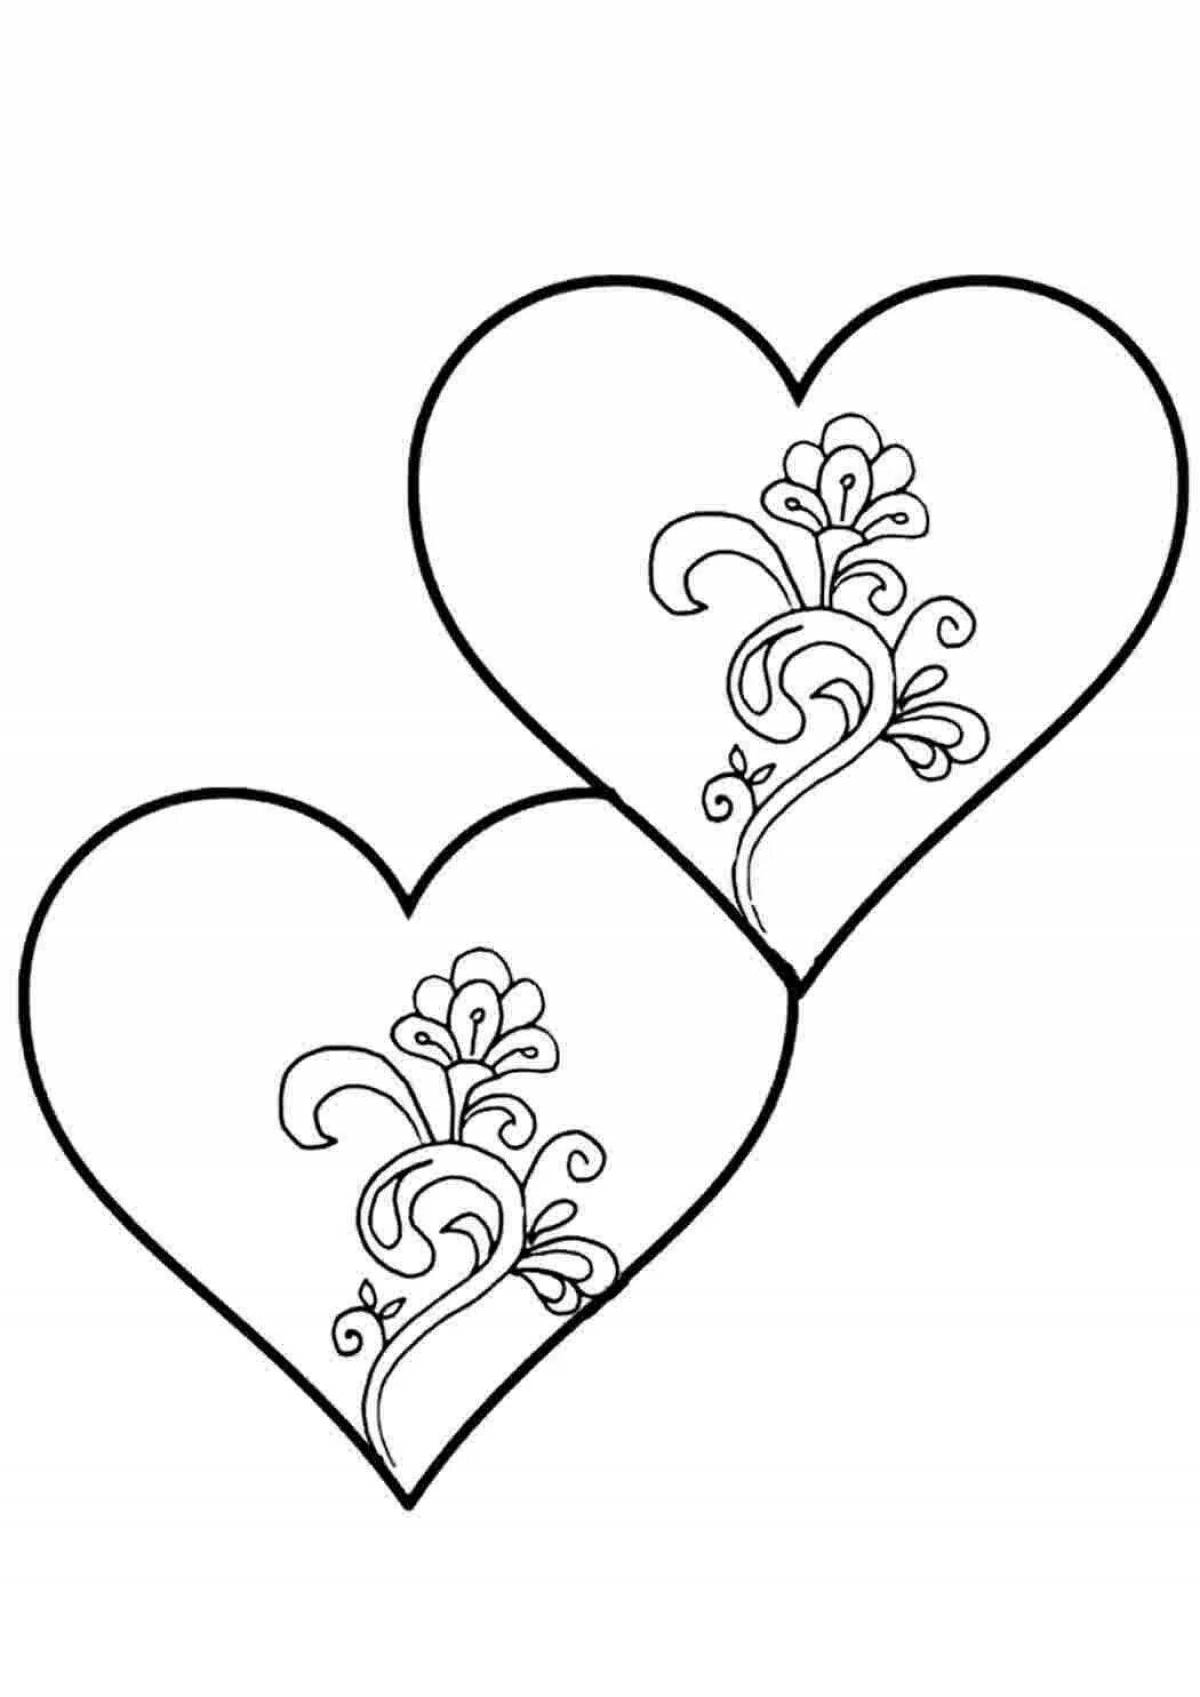 Cute valentine coloring pages for february 14th